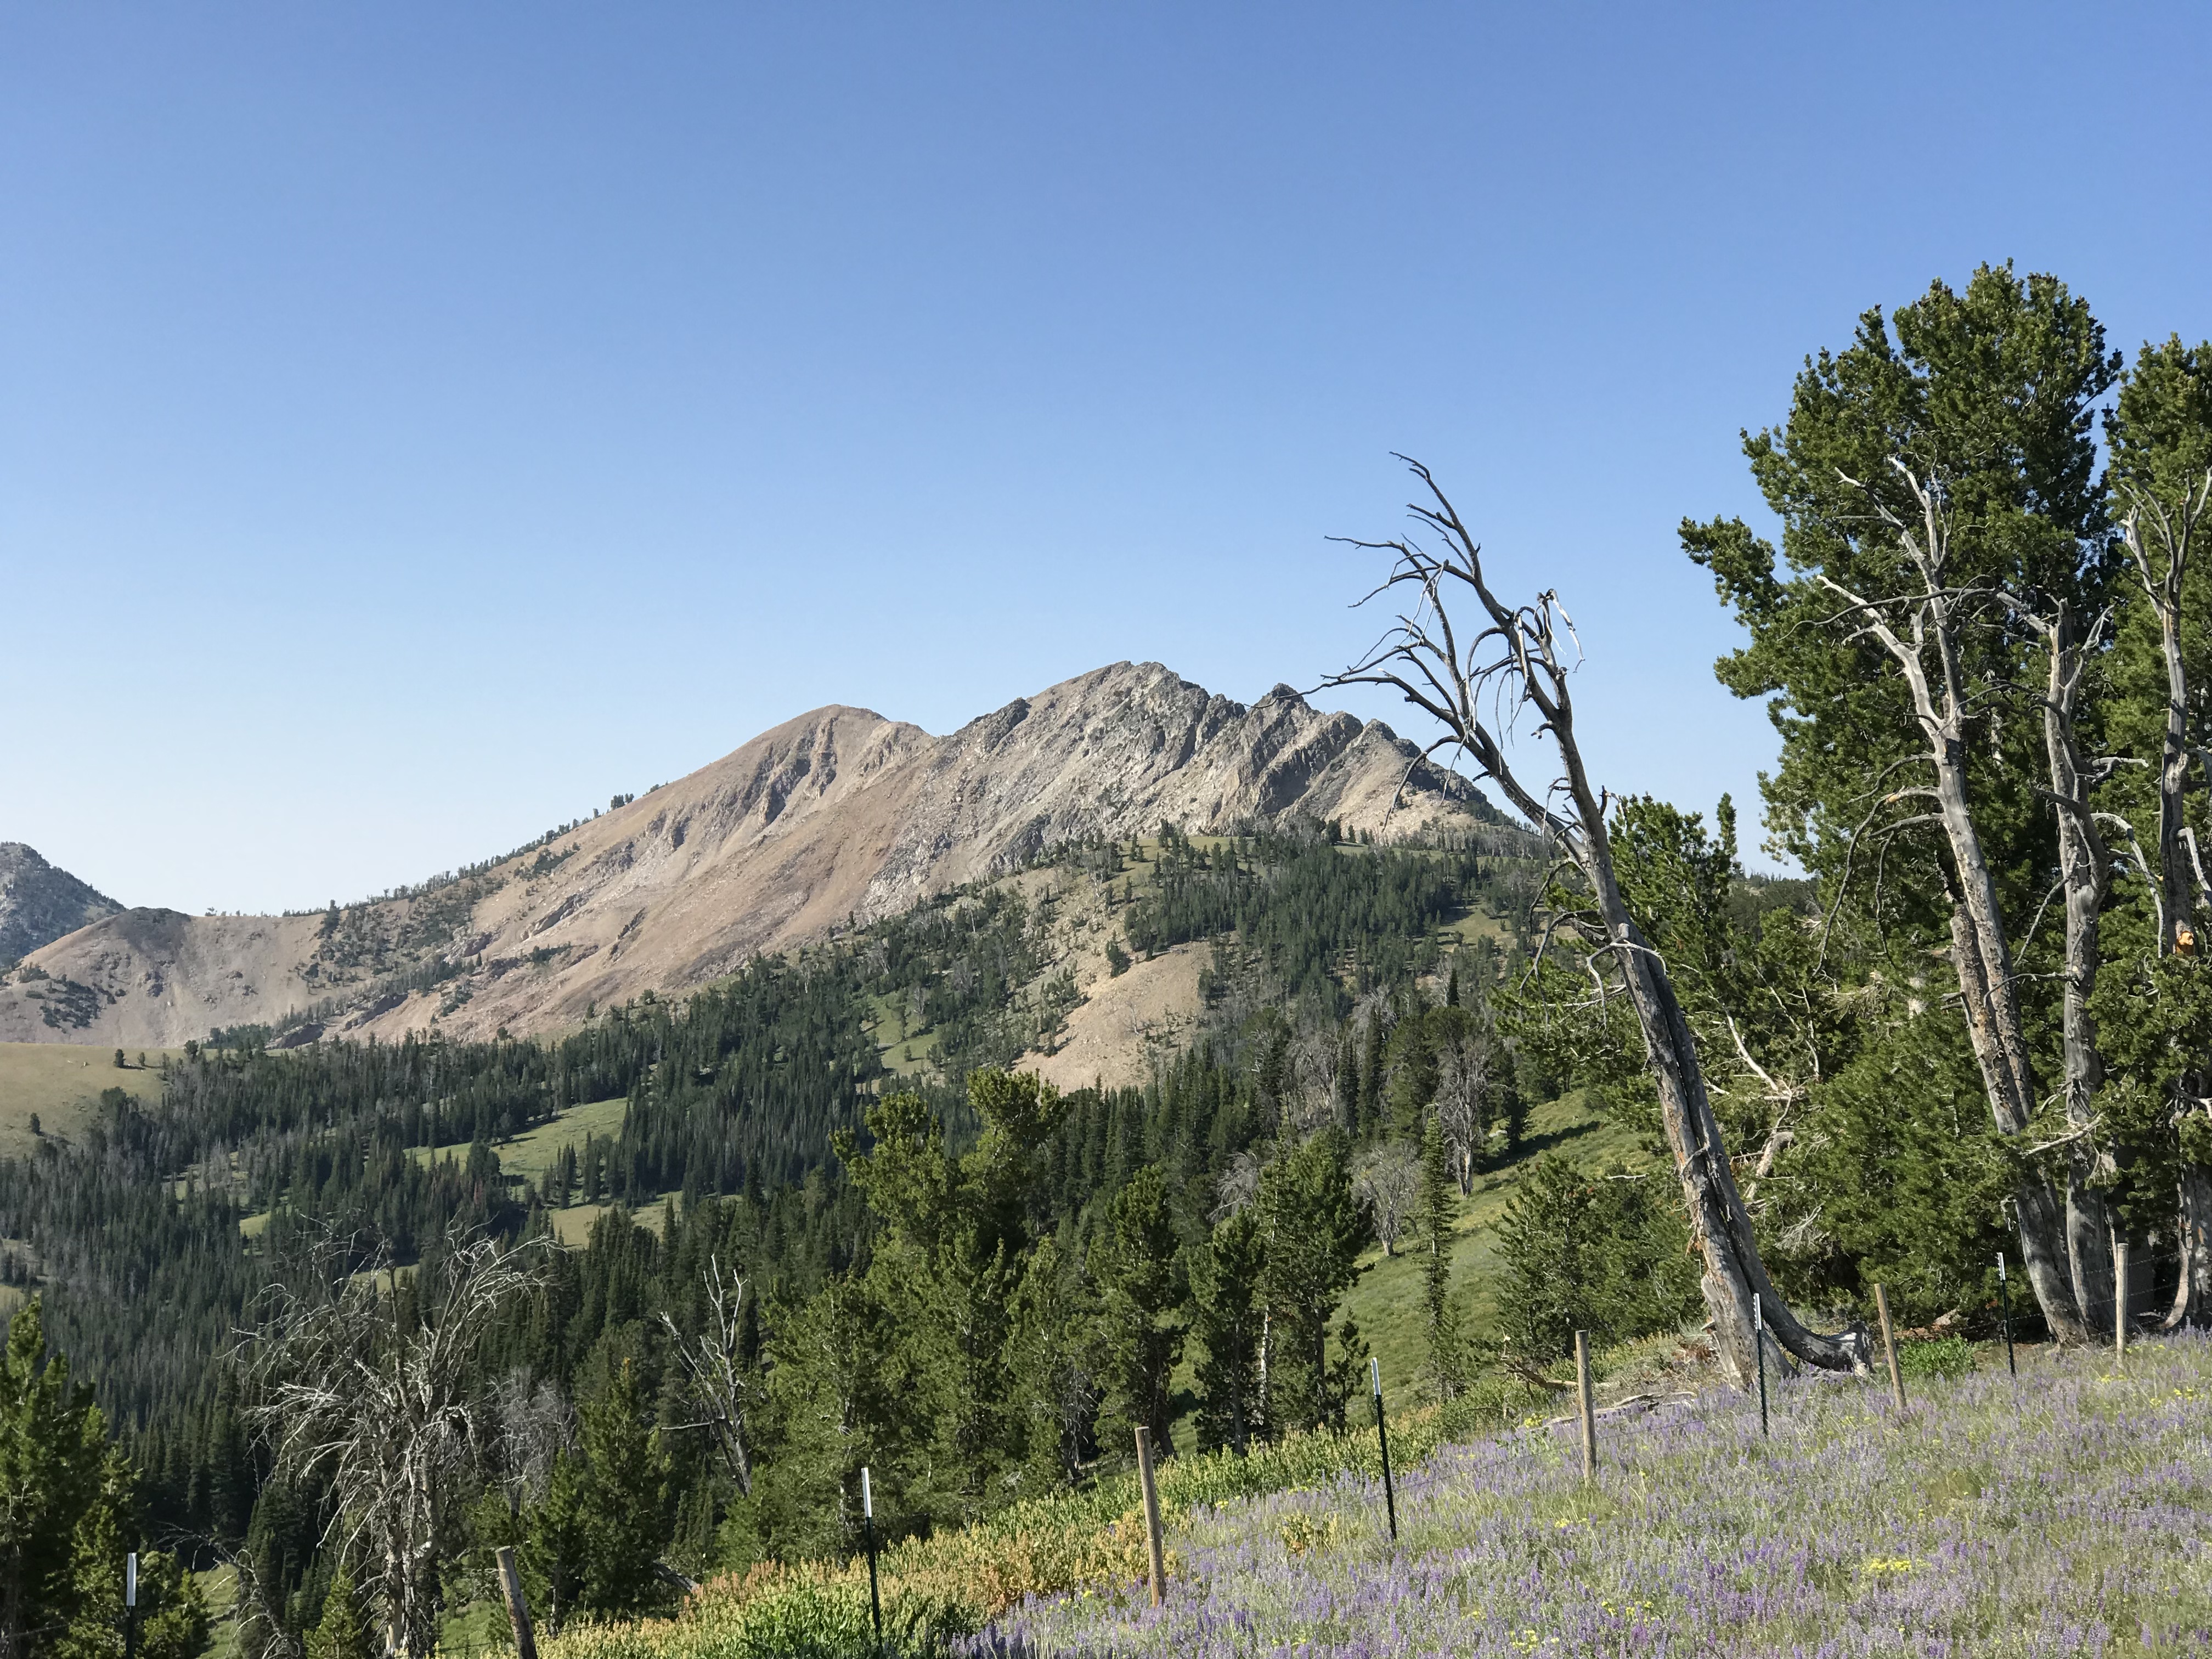 North Smoky Dome and its east face viewed from the north. The highest point is on the left.